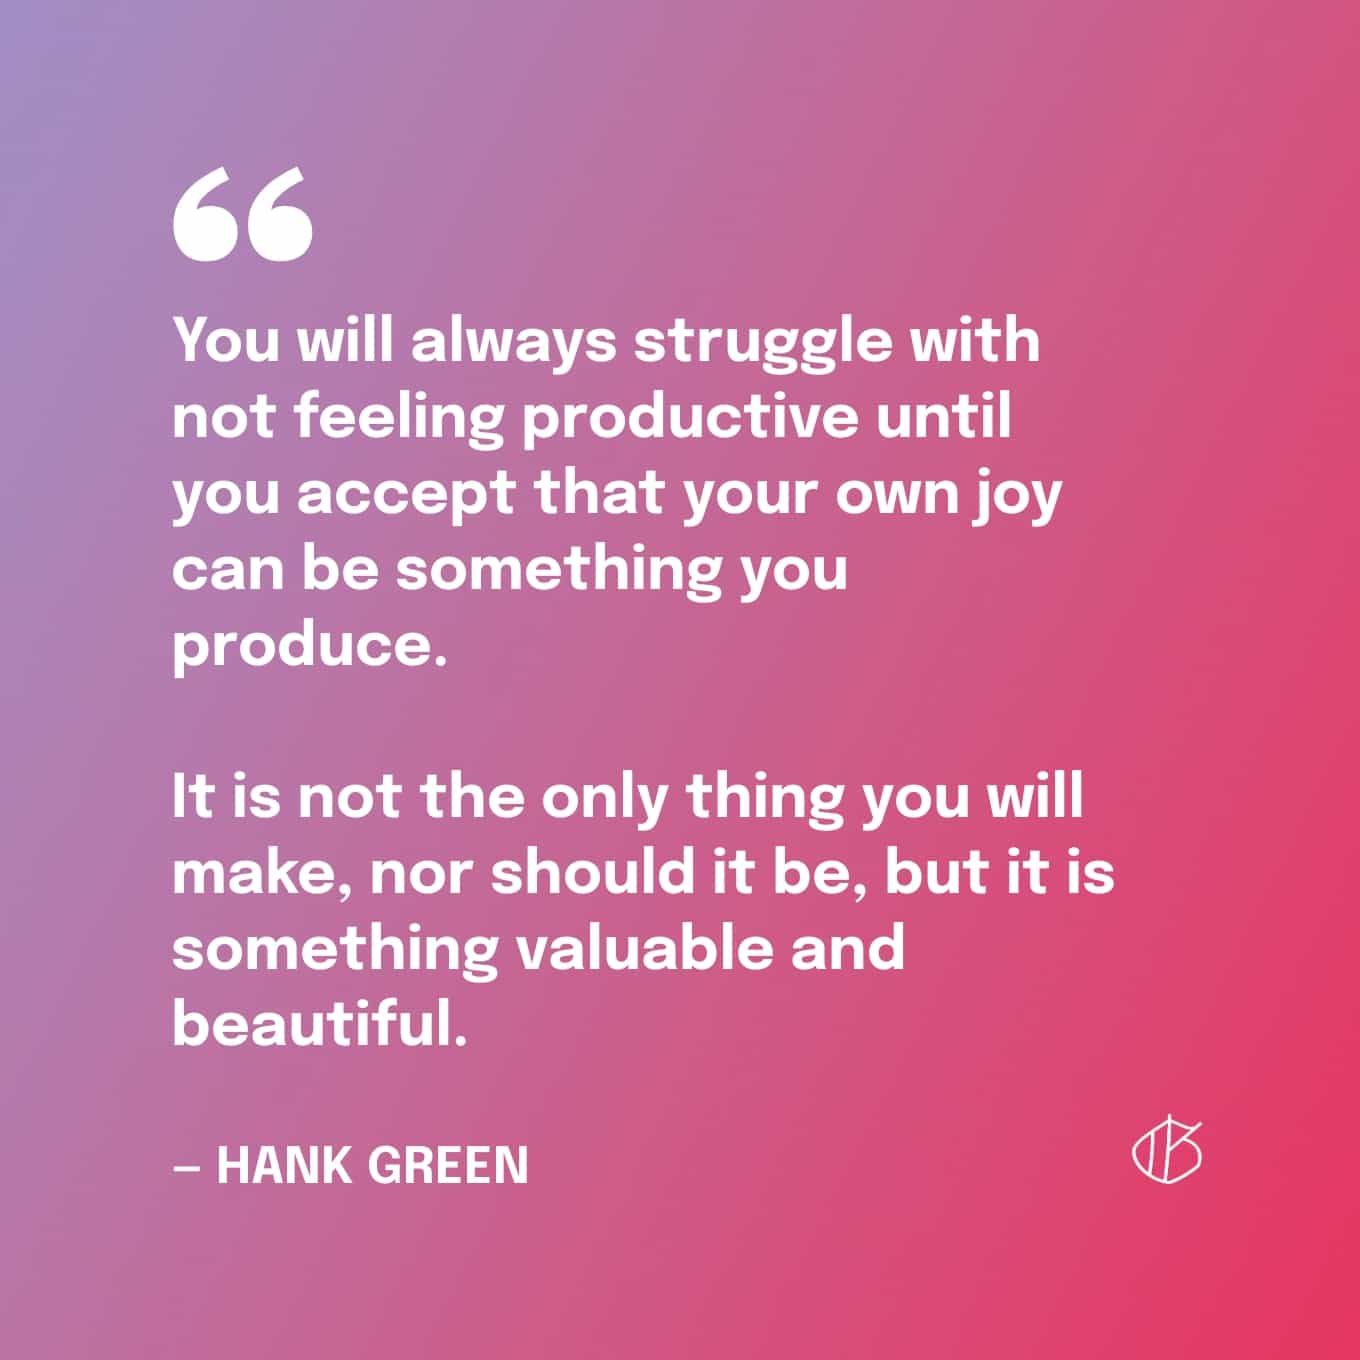 Quote: “You will always struggle with not feeling productive until you accept that your own joy can be something you produce. It is not the only thing you will make, nor should it be, but it is something valuable and beautiful.” — Hank Green